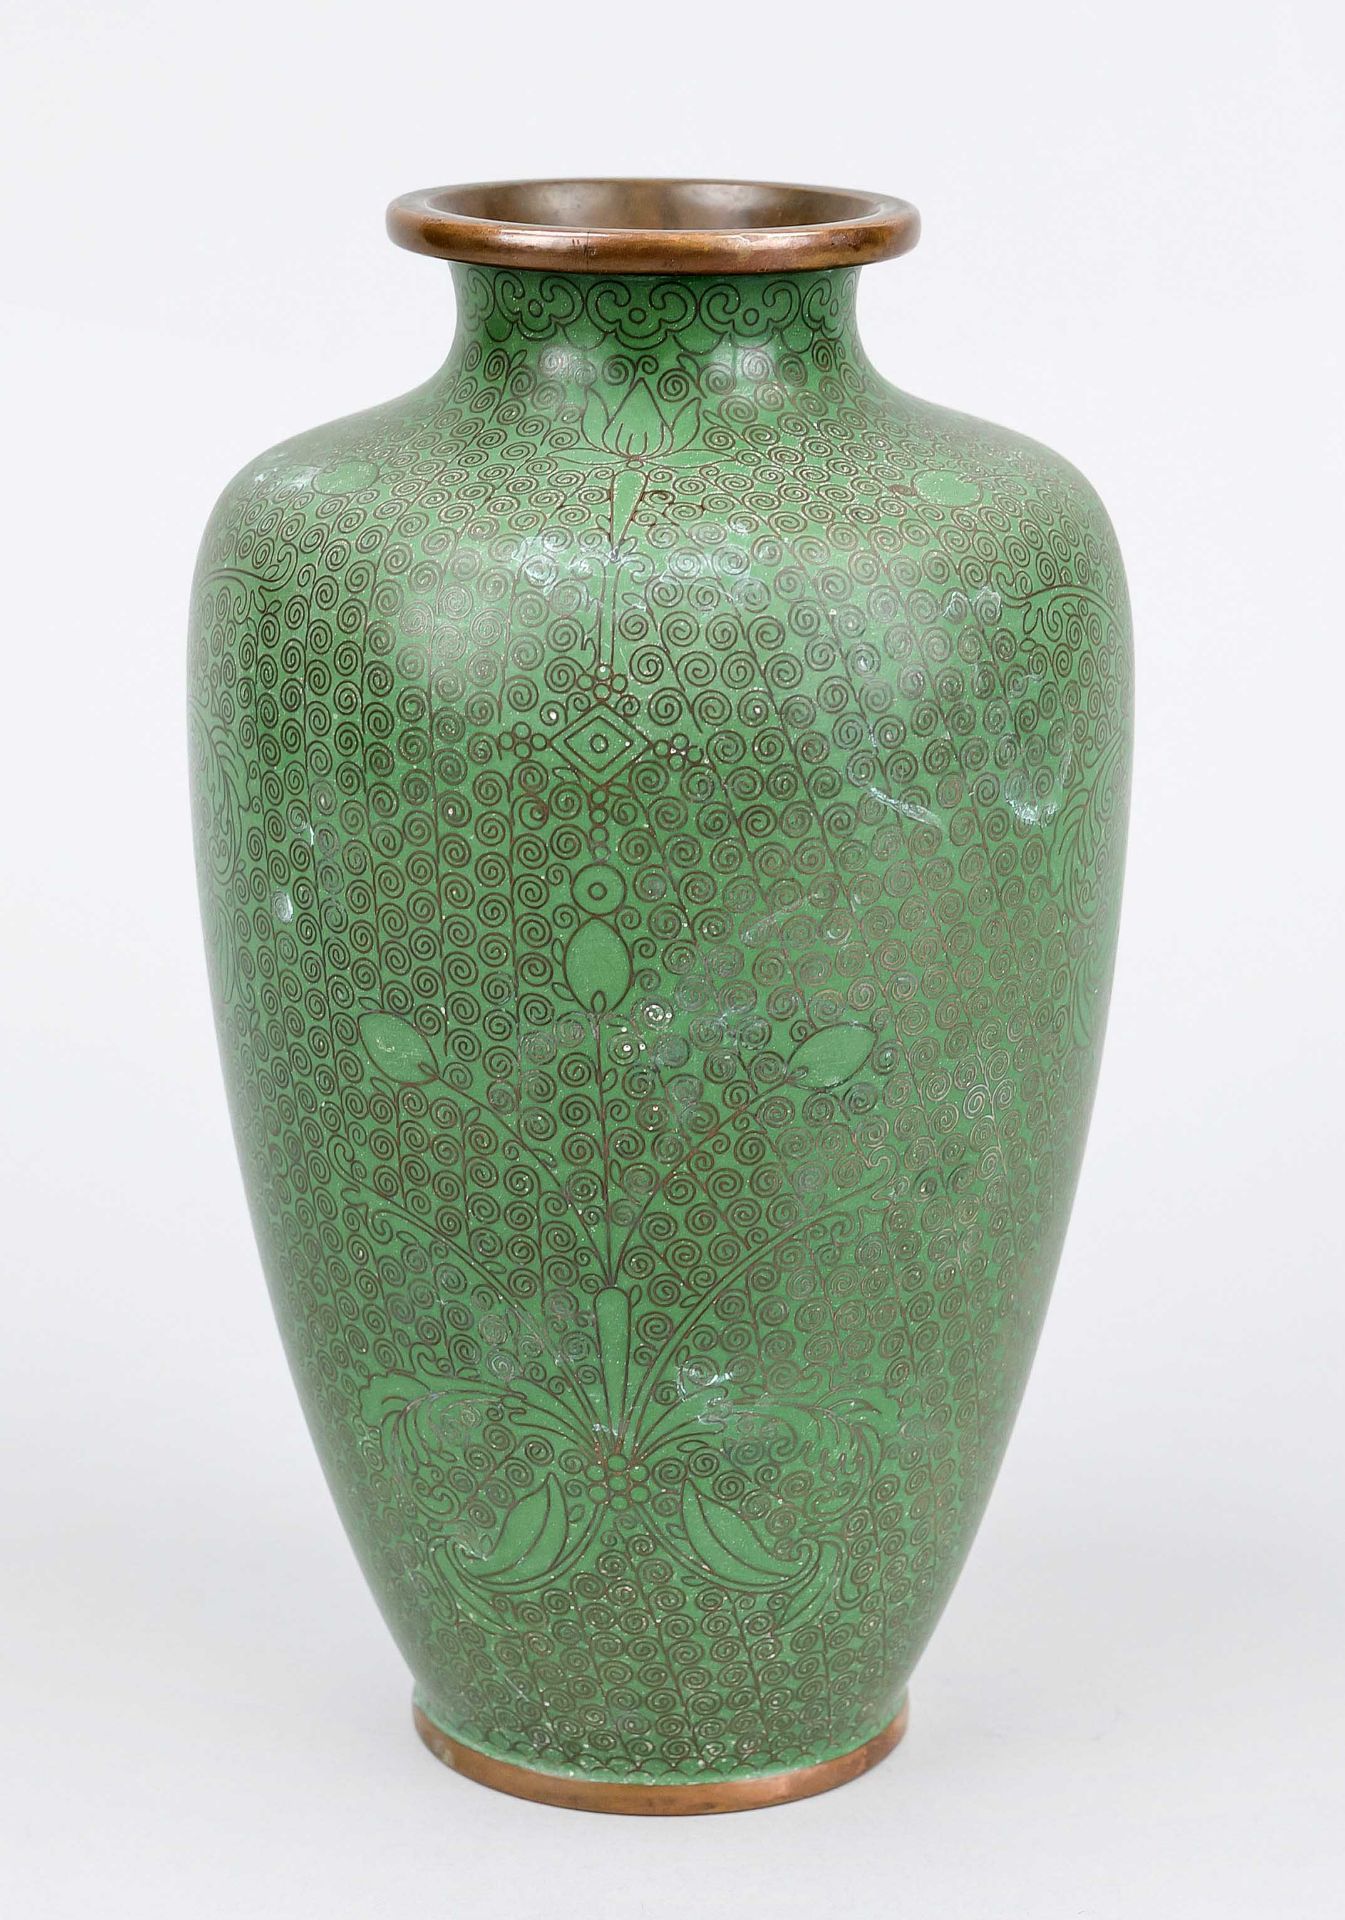 Cloisonné vase, Japan, c. 1900, monochrome, apple-green ground with ornamental and floral wire